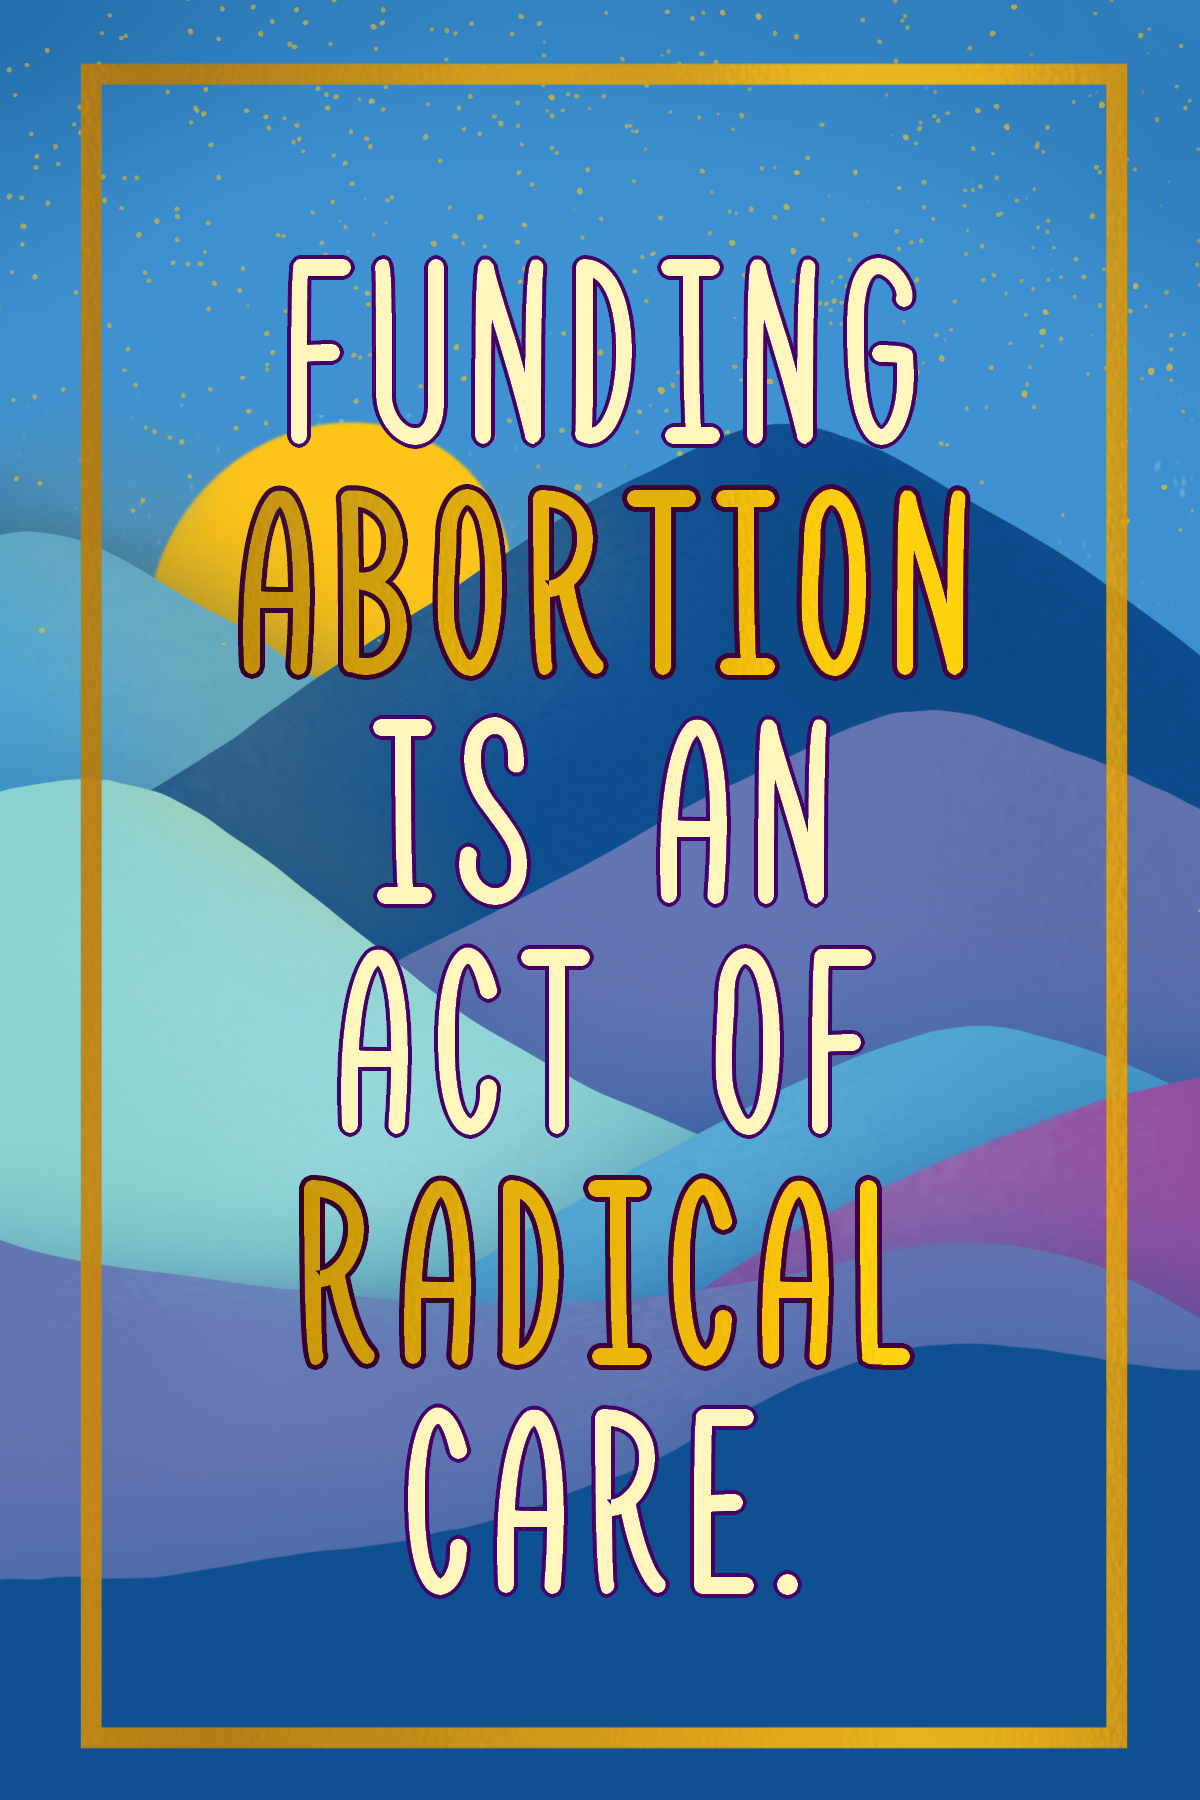 An illustration of green, blue, and purple mountains with the sun in the background. Superimposed on the illustration are the words "Funding abortion is an act of radical care."